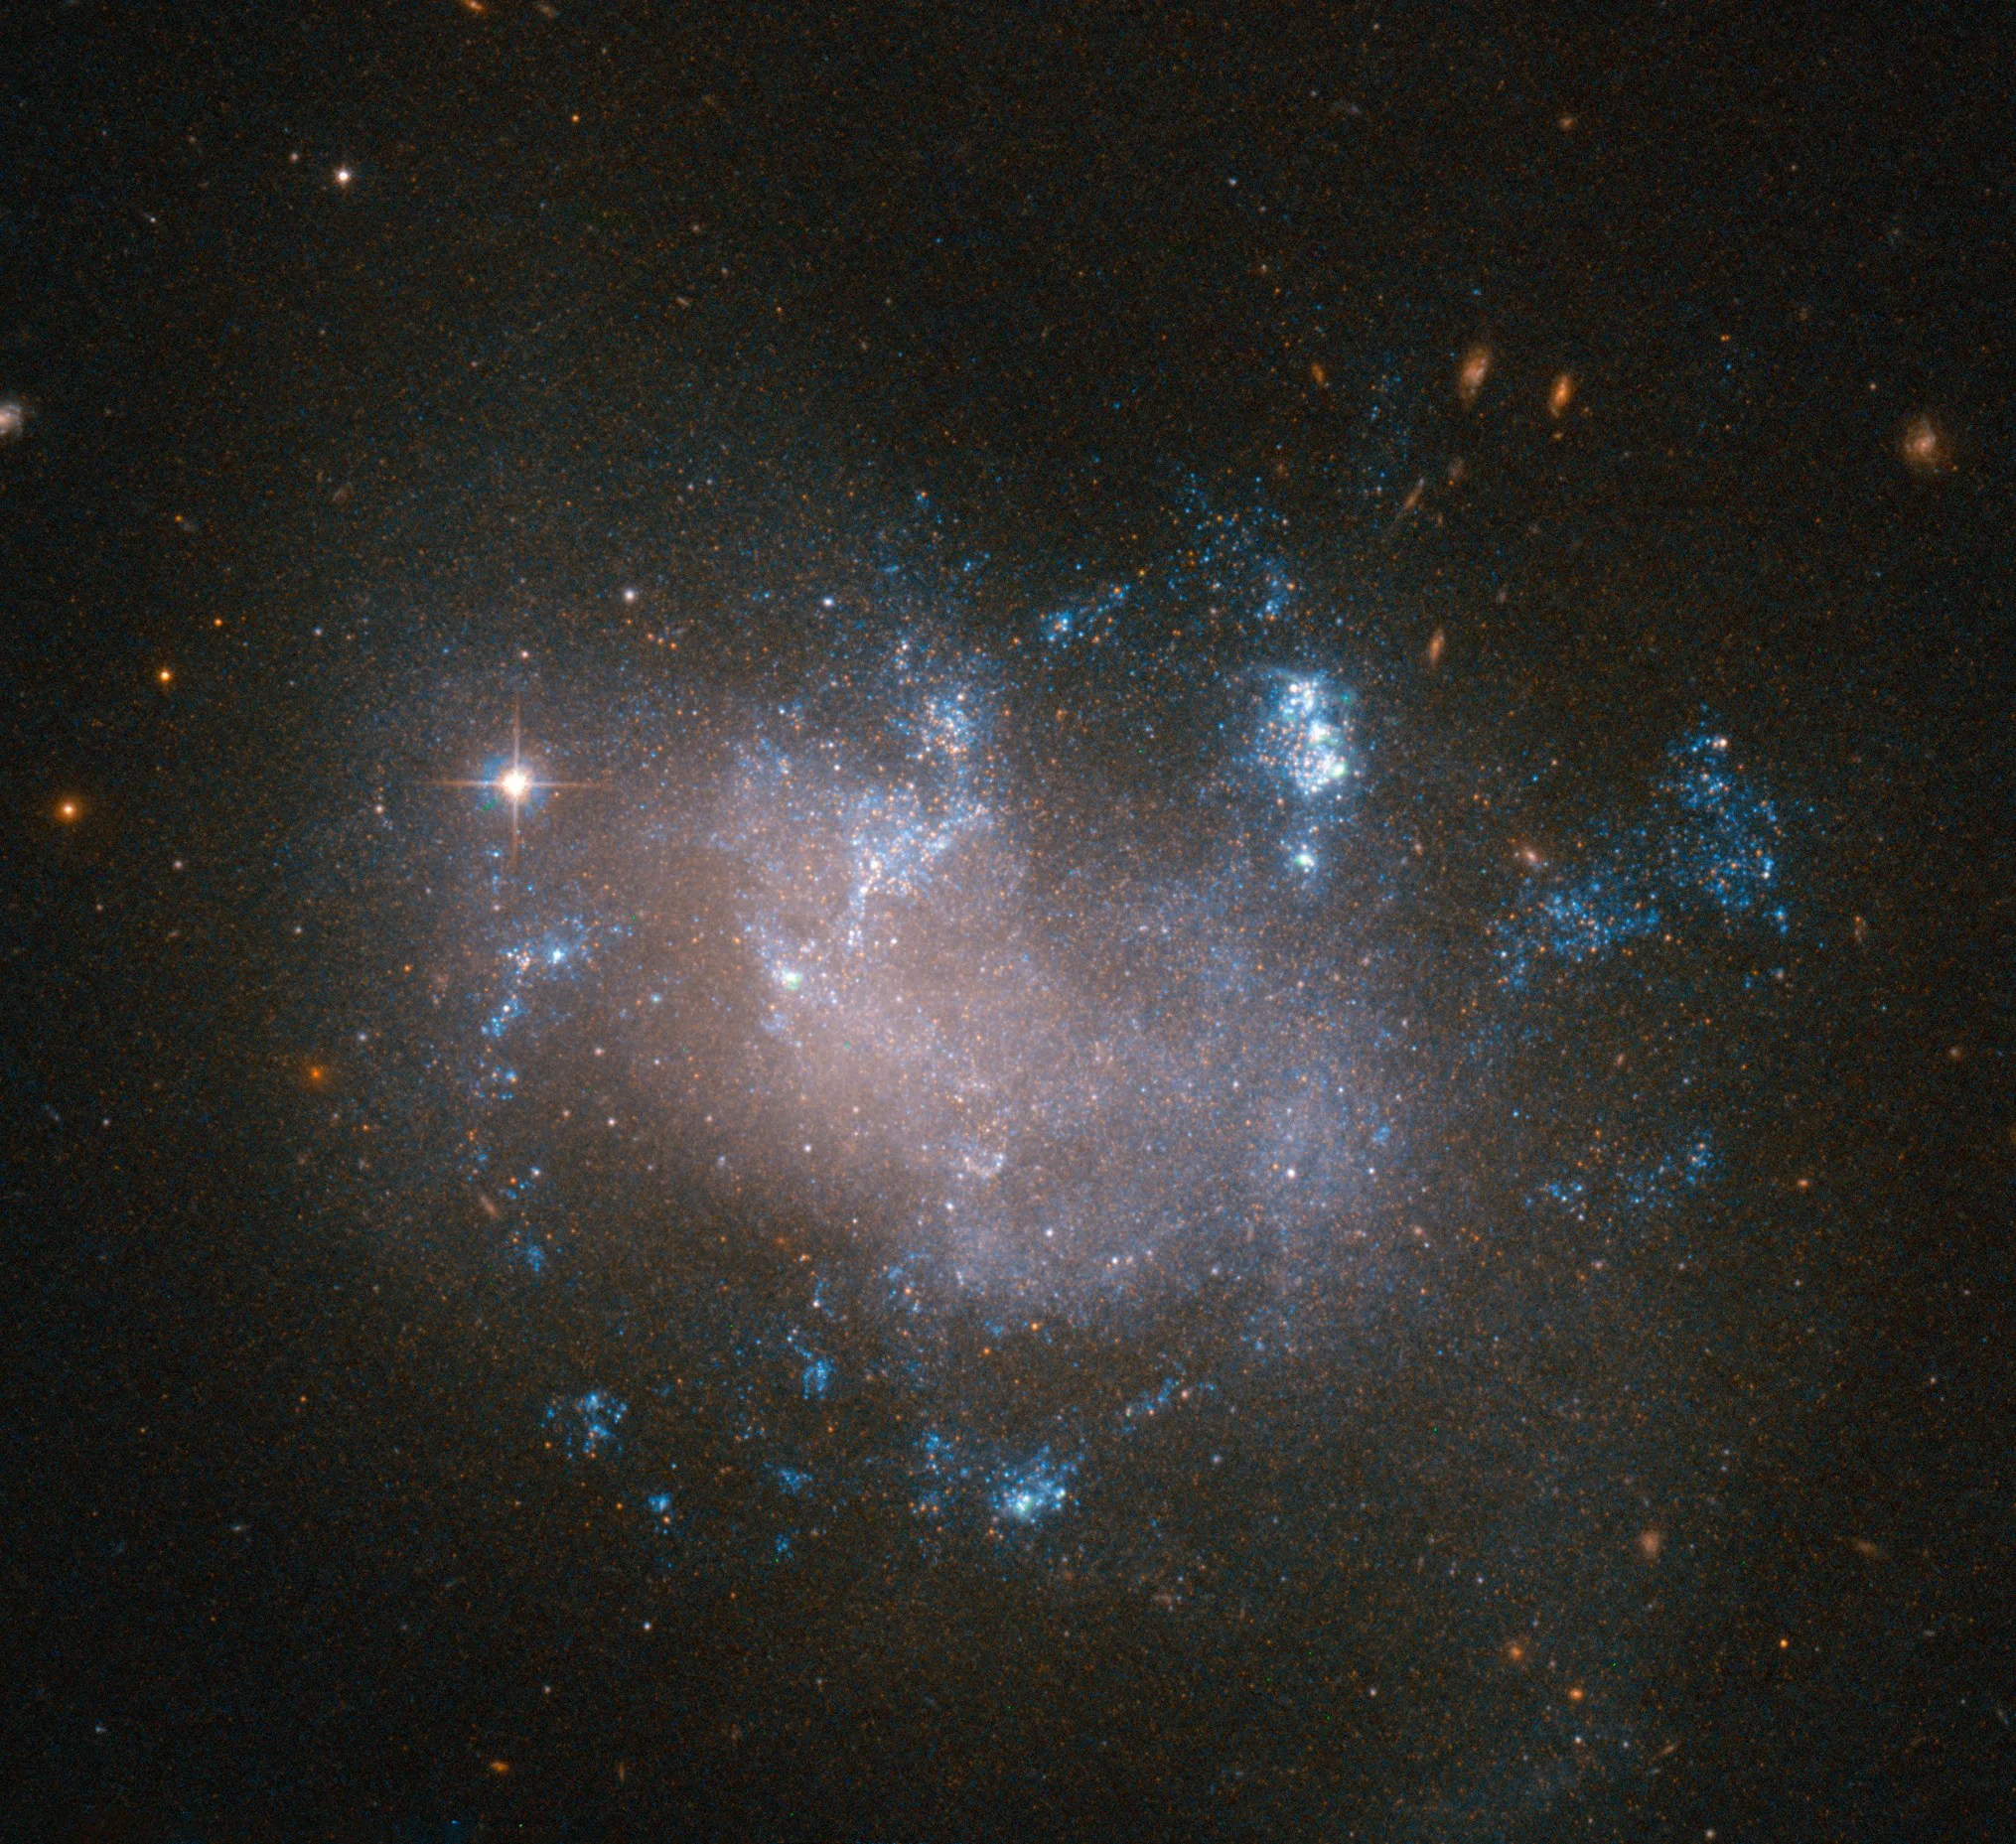 Diffuse galaxy with blue patches